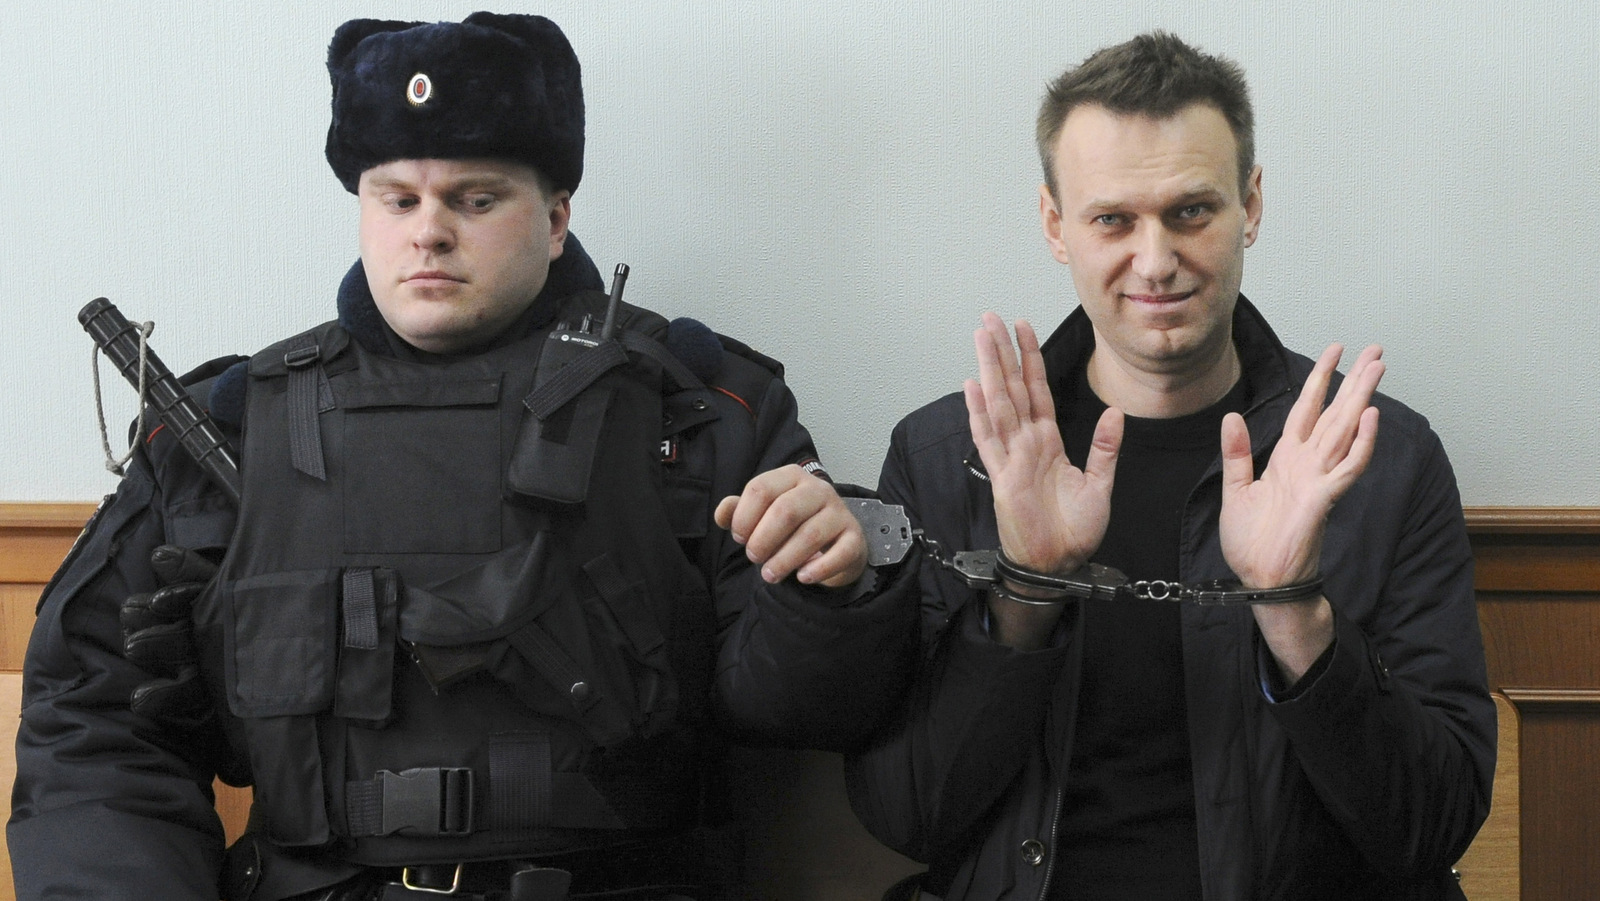 Russian opposition leader Alexei Navalny, right, poses for press in court in Moscow, Russia, Thursday, March 30, 2017. Navalny attends a court hearing on his appeal. Navalny, who organized a wave of nationwide protests against government corruption was sentenced to 15 days in jail. (AP Photo)